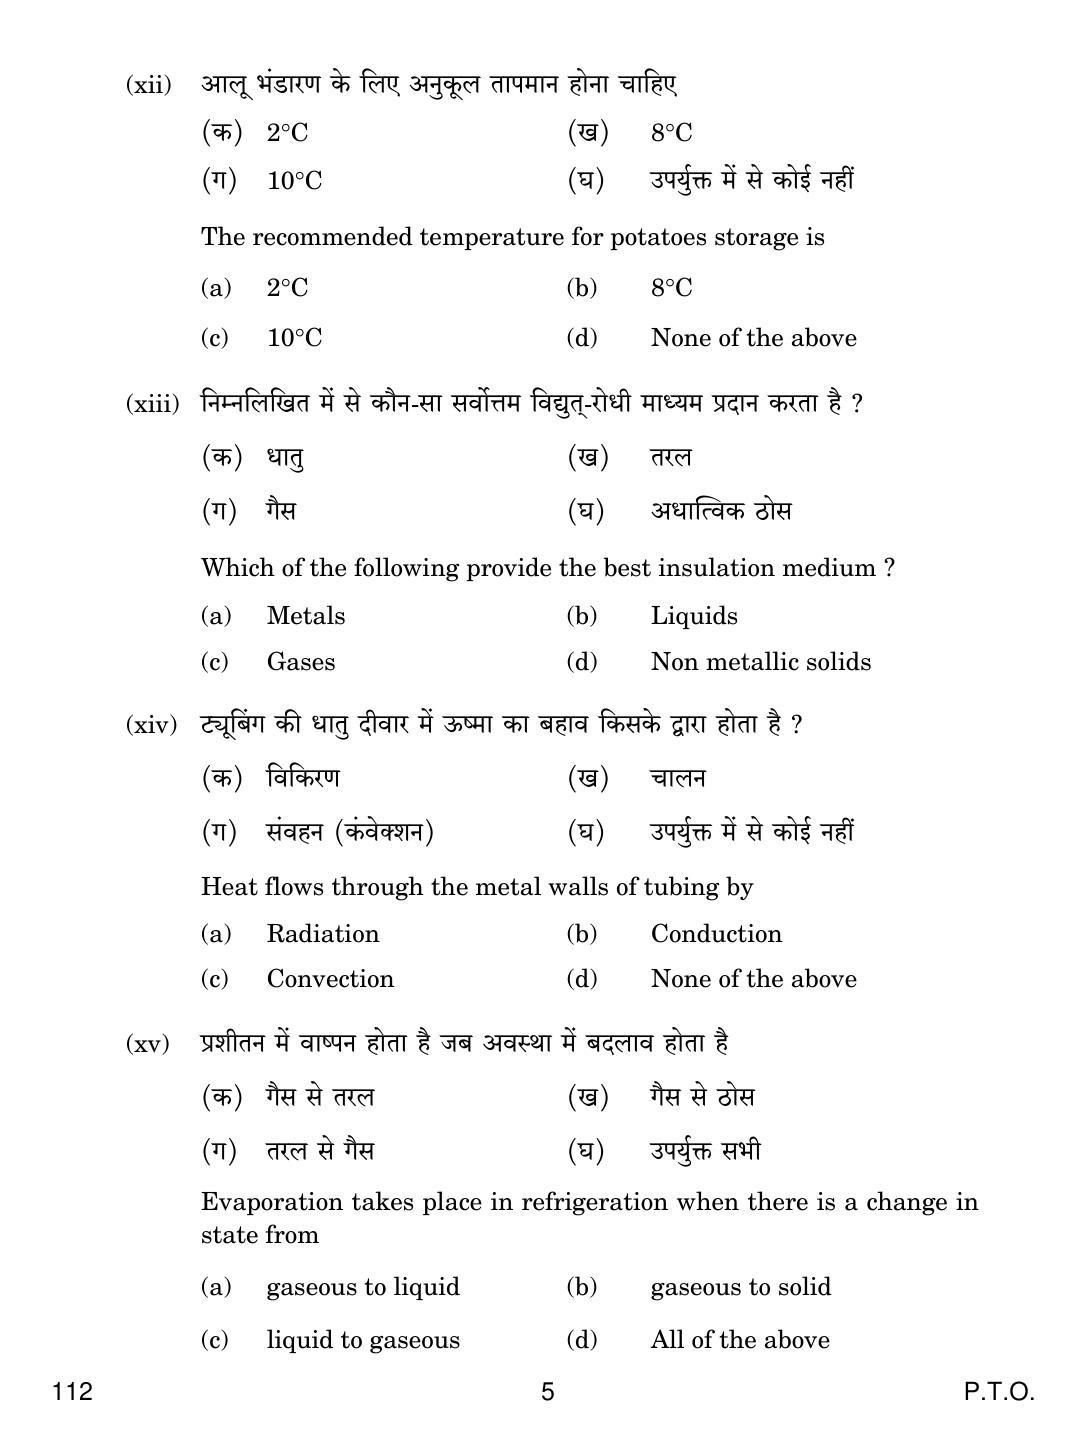 CBSE Class 12 112 Air-Conditioning And Refrigeration-III 2019 Question Paper - Page 5